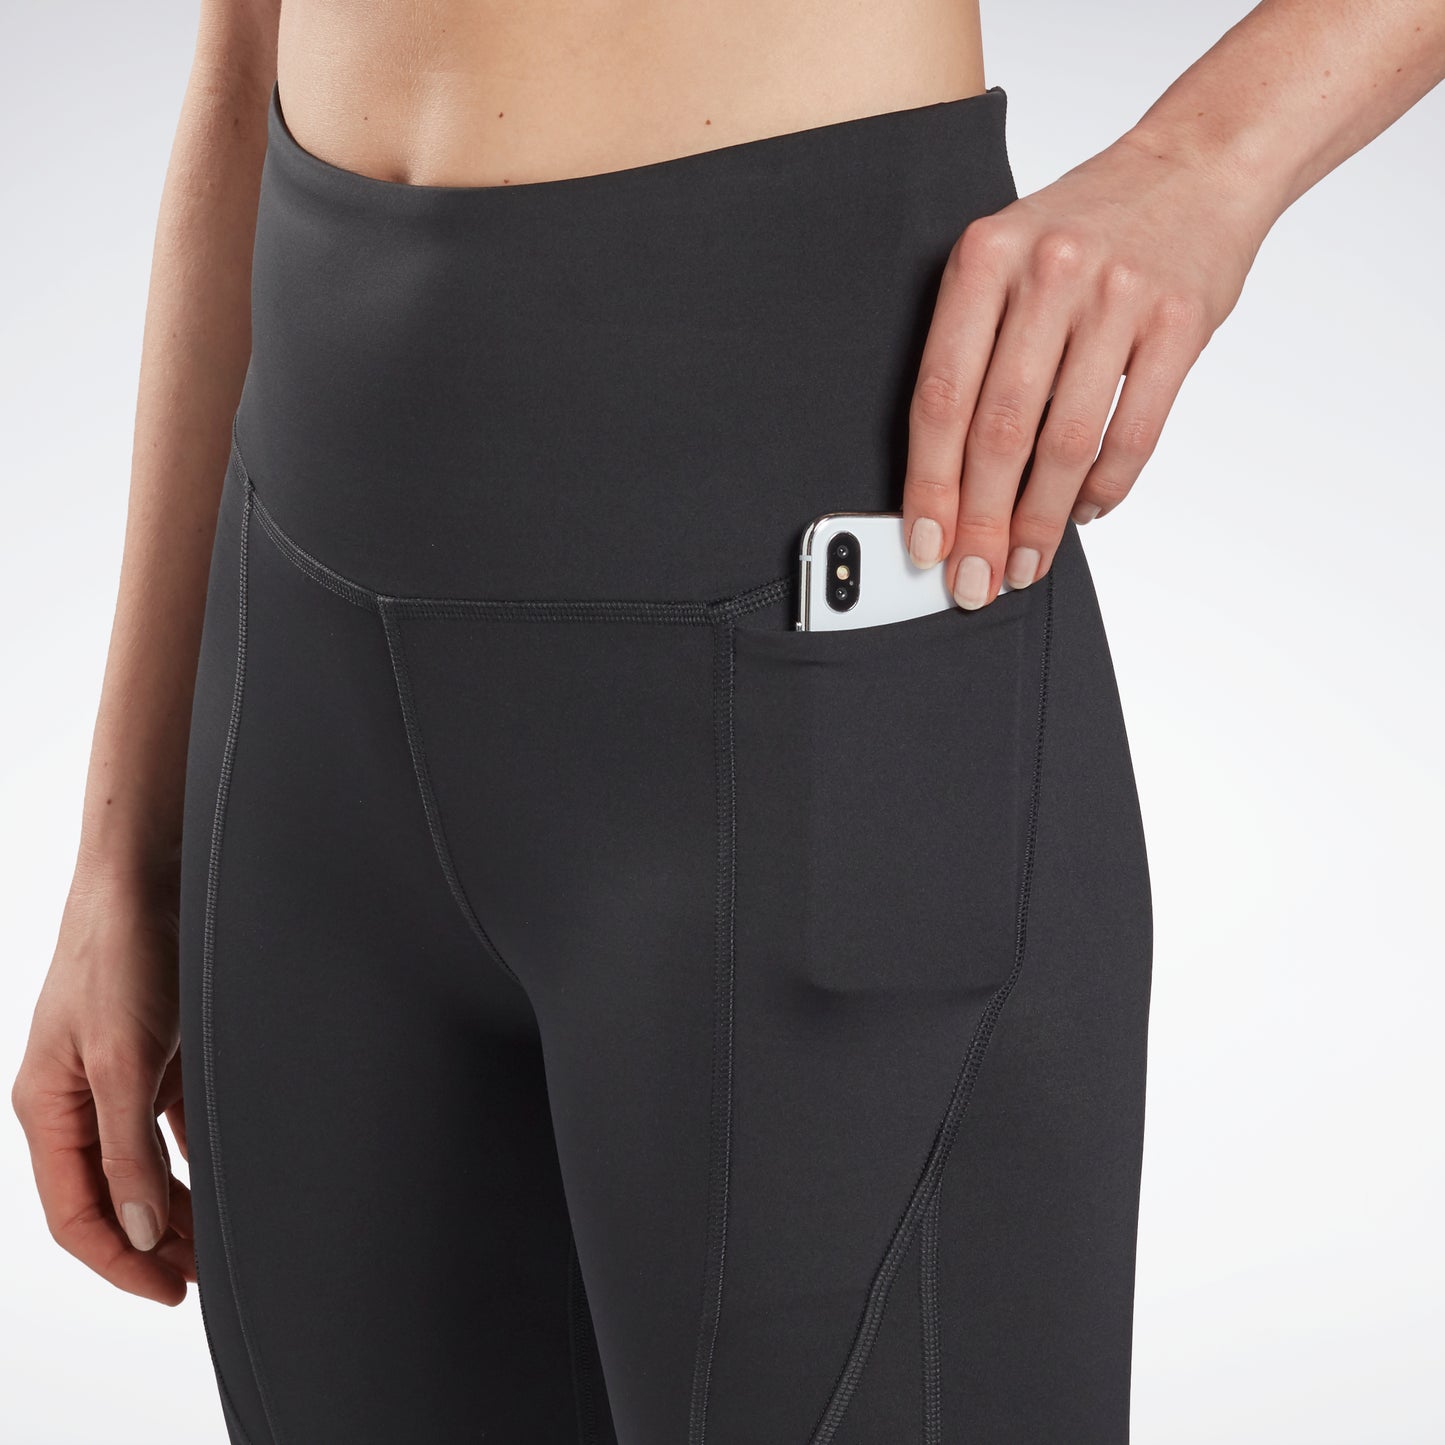 Women's Active Buttery-Soft Capri Workout Leggings. • 5 high rise  waistband lies flat against your skin • Ultra buttery soft fabrication •  Squat Proof • Interior waistband pocket can hold keys, cards